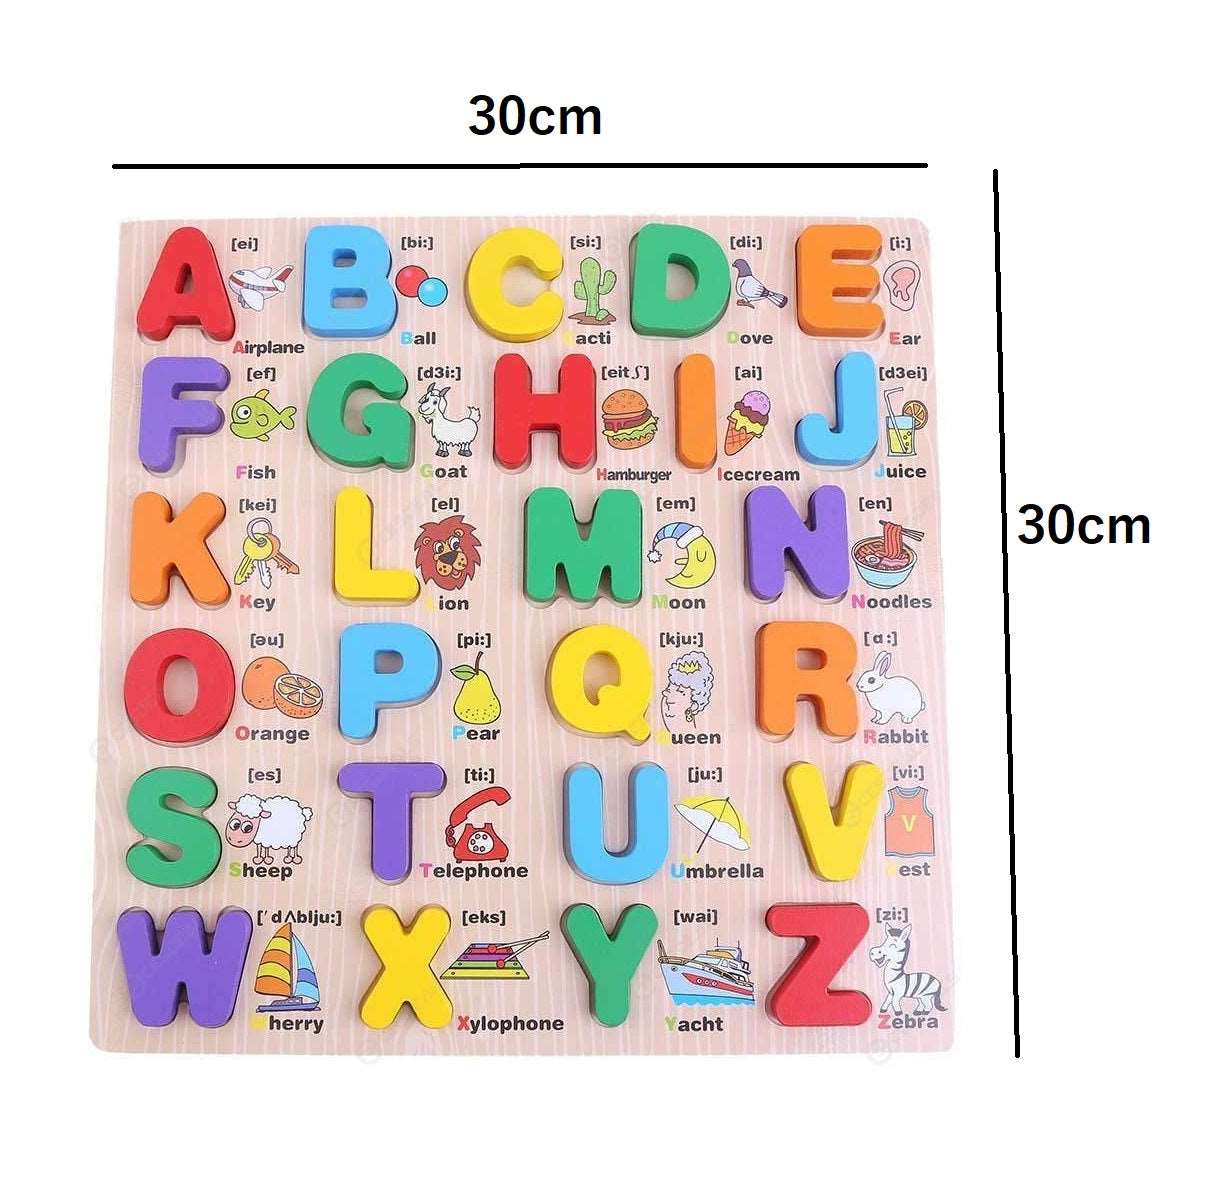 Alphabet Learning ABC with Capital and Small Letters Colorful Educational Puzzle Toy for Toddlers